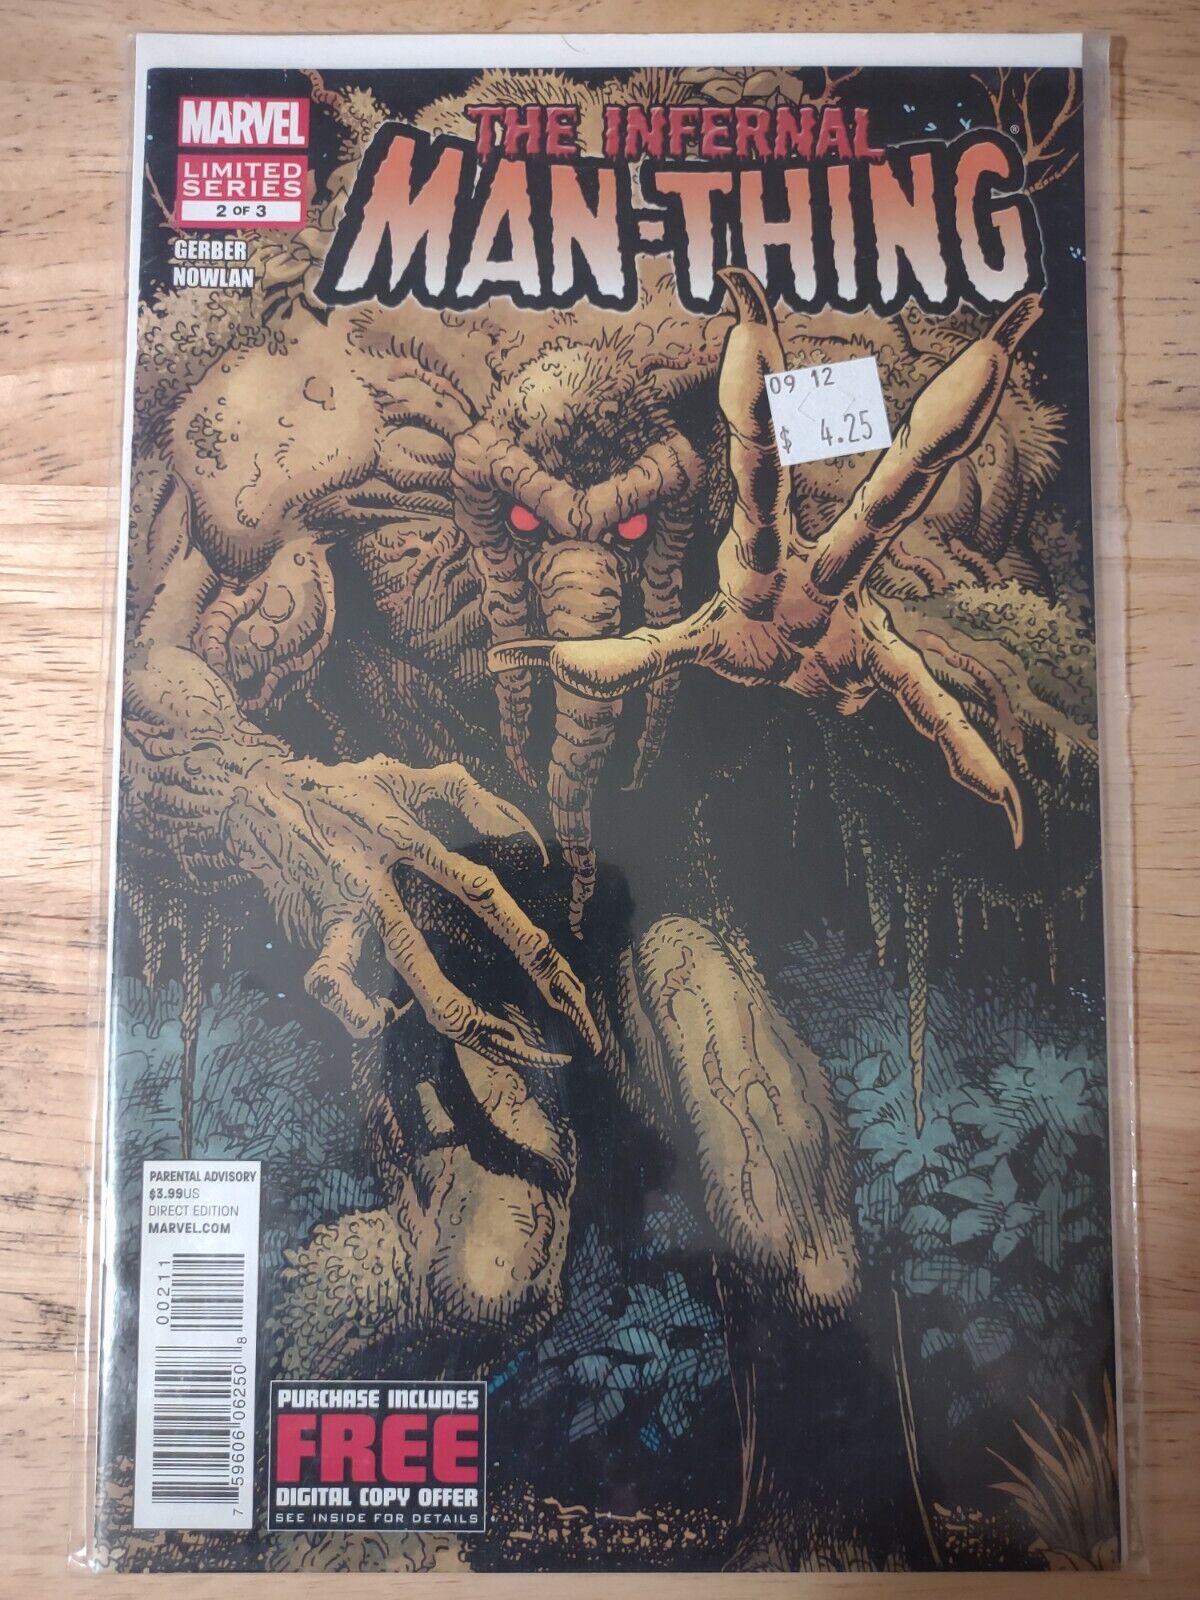 The Infernal Man-Thing #2 by Steve Gerber *$5 FLAT RATE SHIPPING ON COMICS